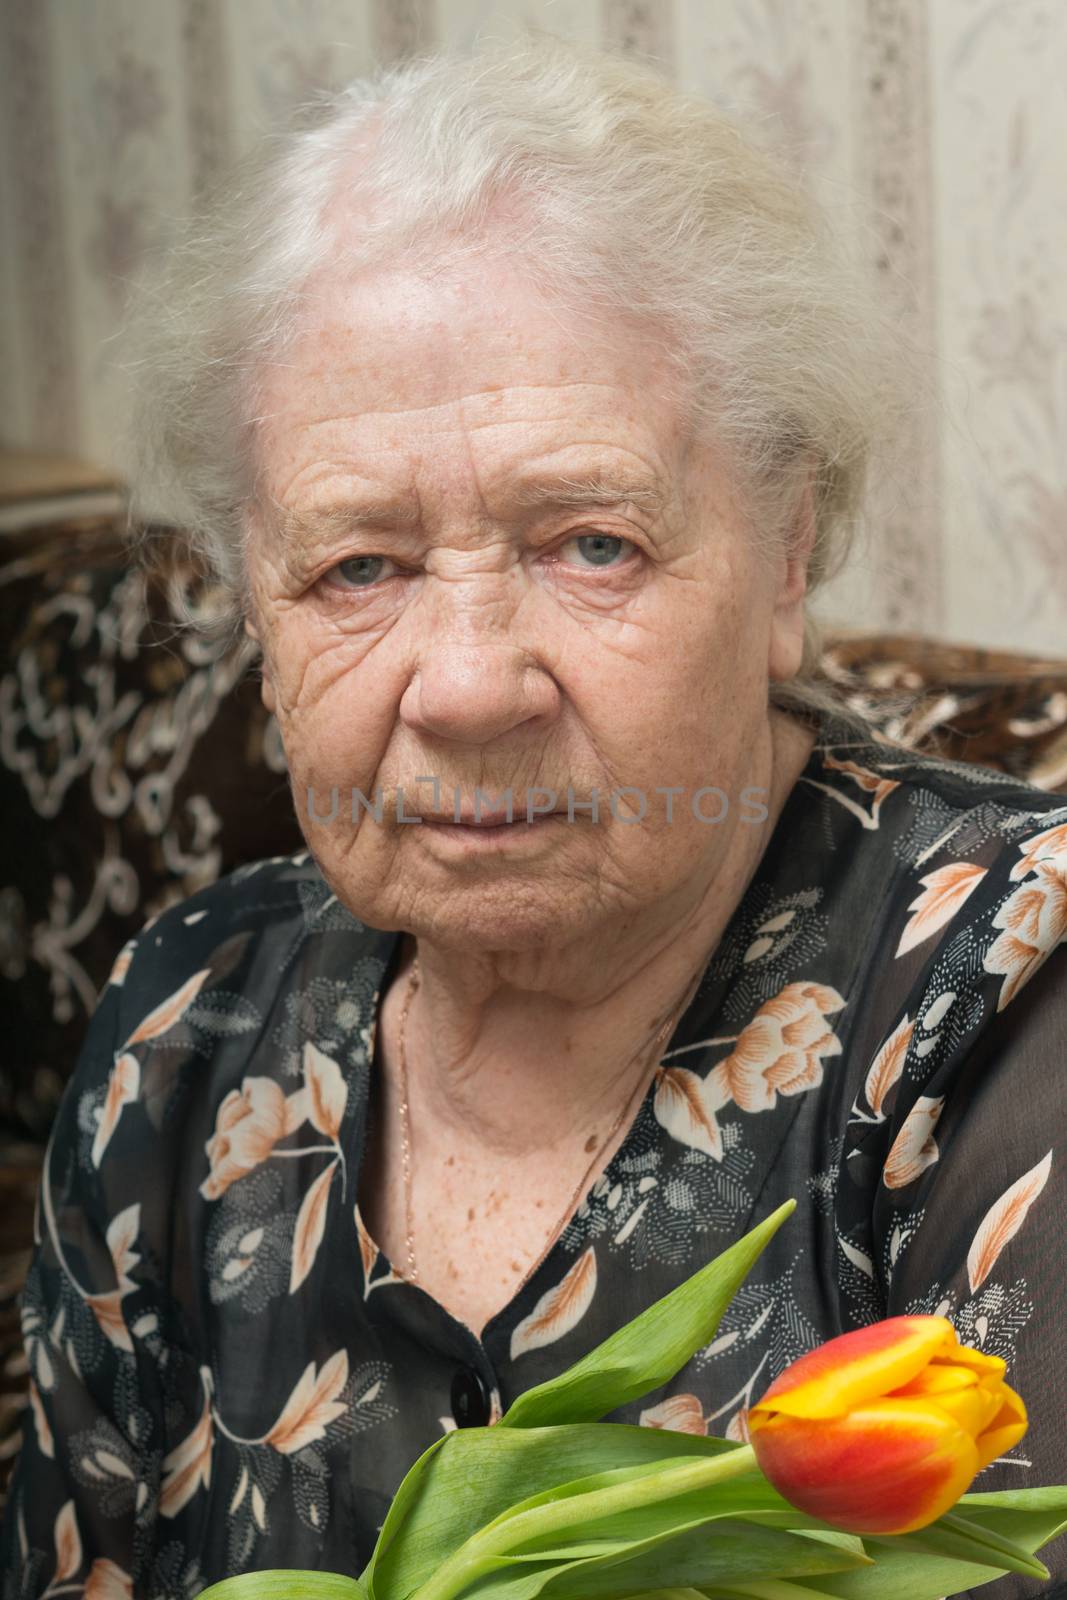 Senior woman portrait of a 88 year old lady 